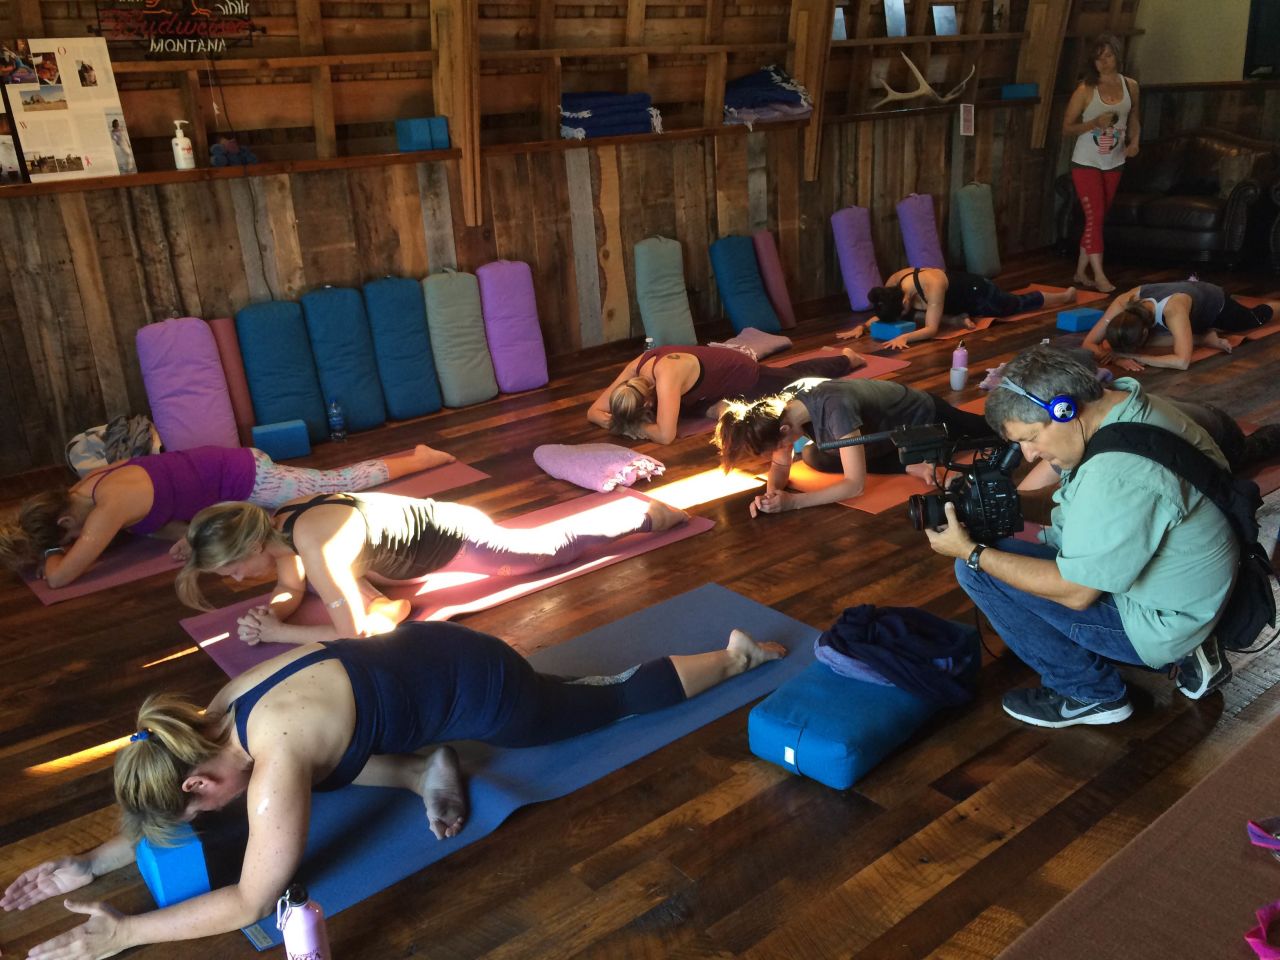 Getting over the fear of riding or interacting with a horse is a big focus for many of Cowgirl Yoga's clients. "To be able to come here and mix that with the yoga is just wonderful. It's the horse-human connection, and being open to whatever that brings," Vap says. 